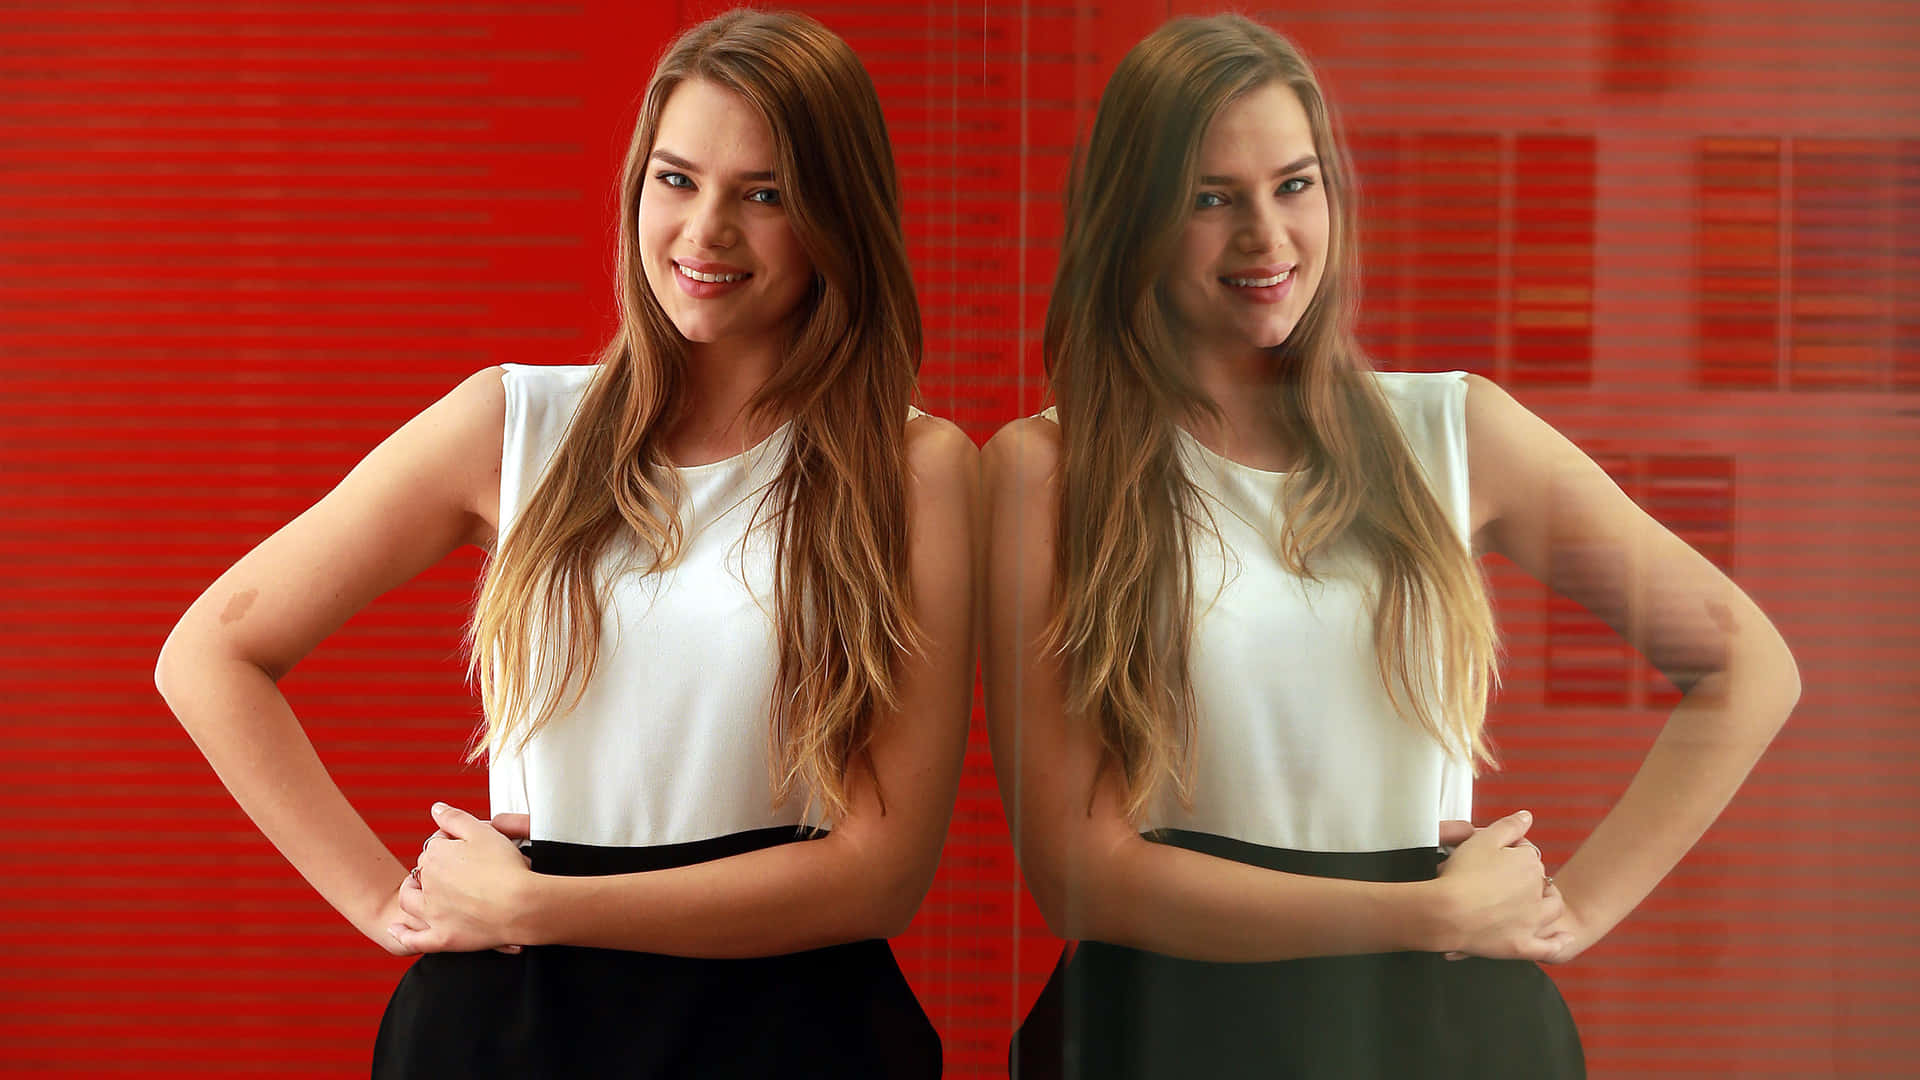 Indiana Evans White Top Red Background Background